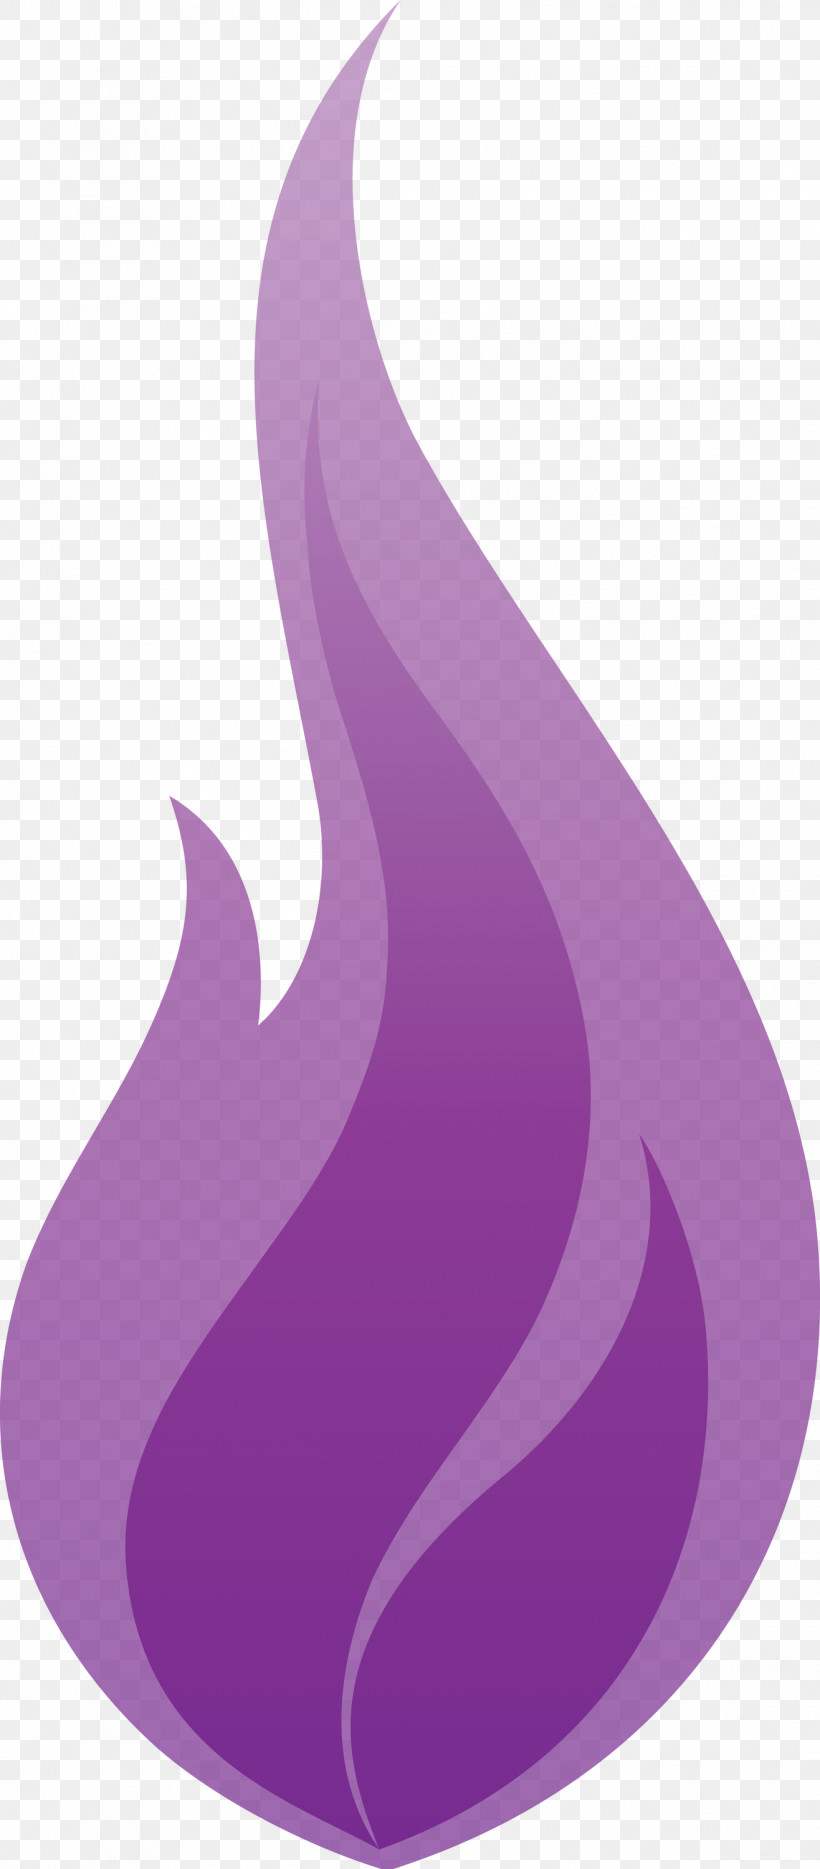 Fire Flame, PNG, 1316x3000px, Fire, Flame, Lavender, Violet Download Free